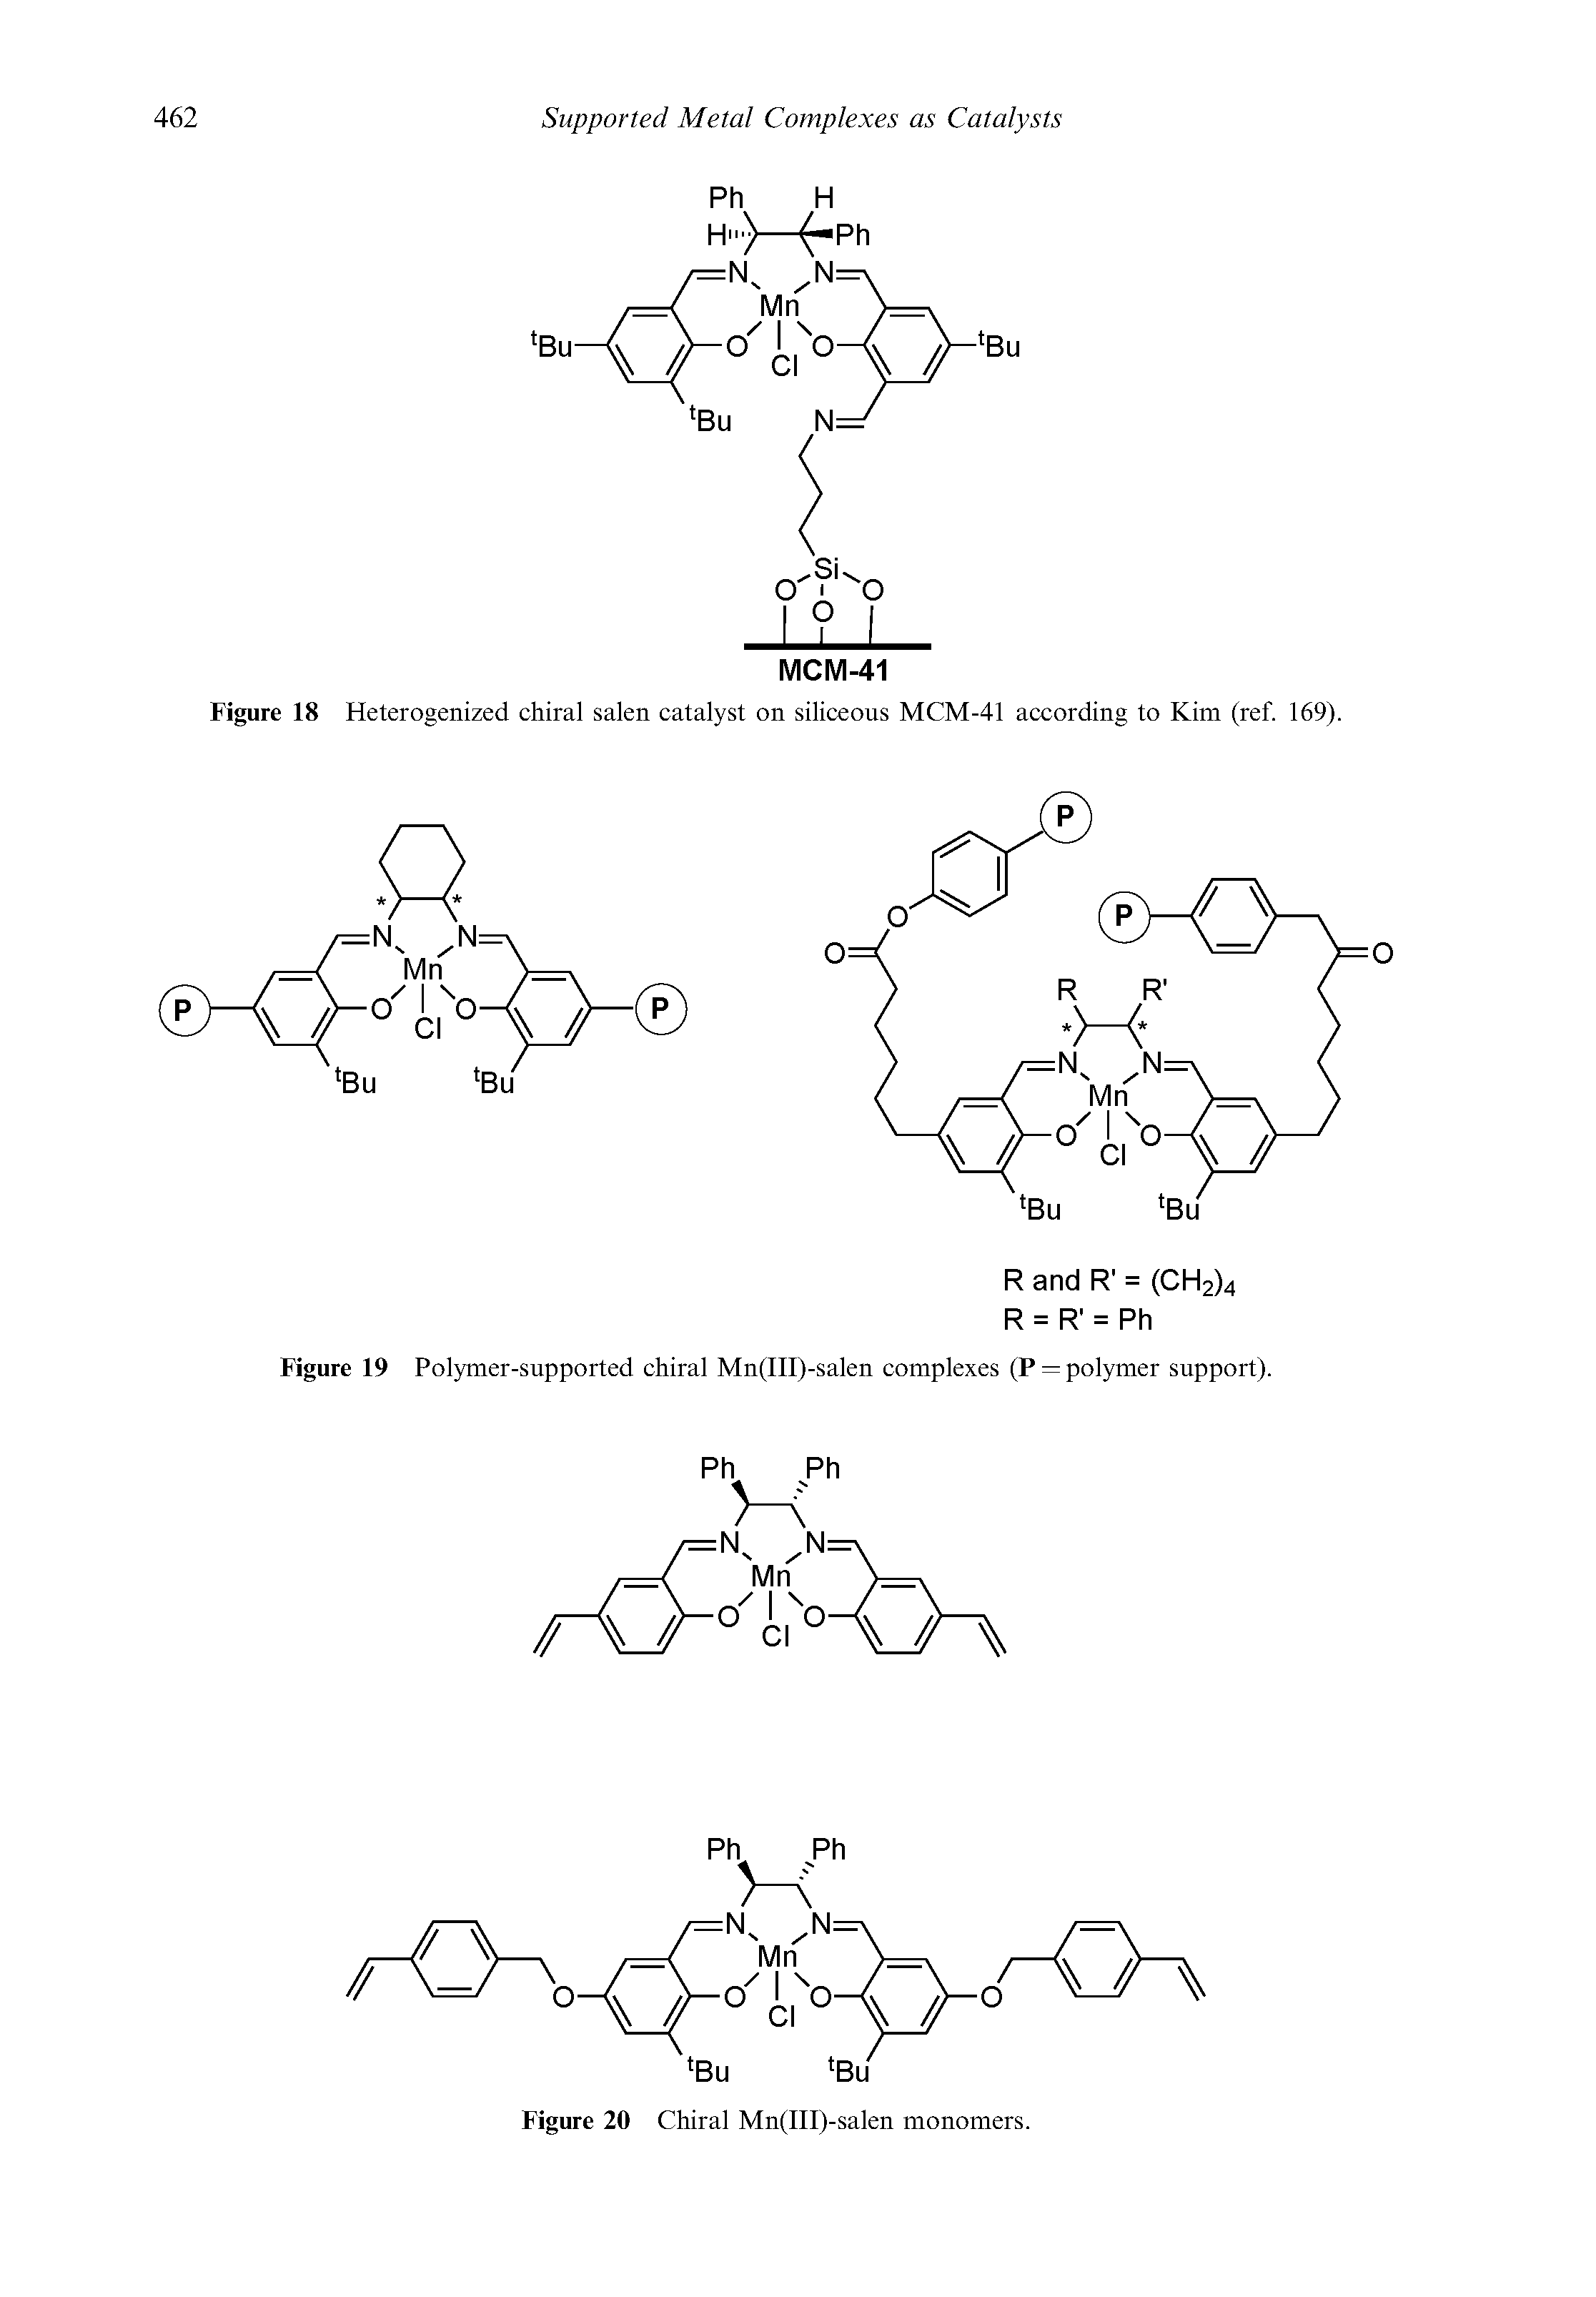 Figure 19 Polymer-supported chiral Mn(III)-salen complexes (P = polymer support).